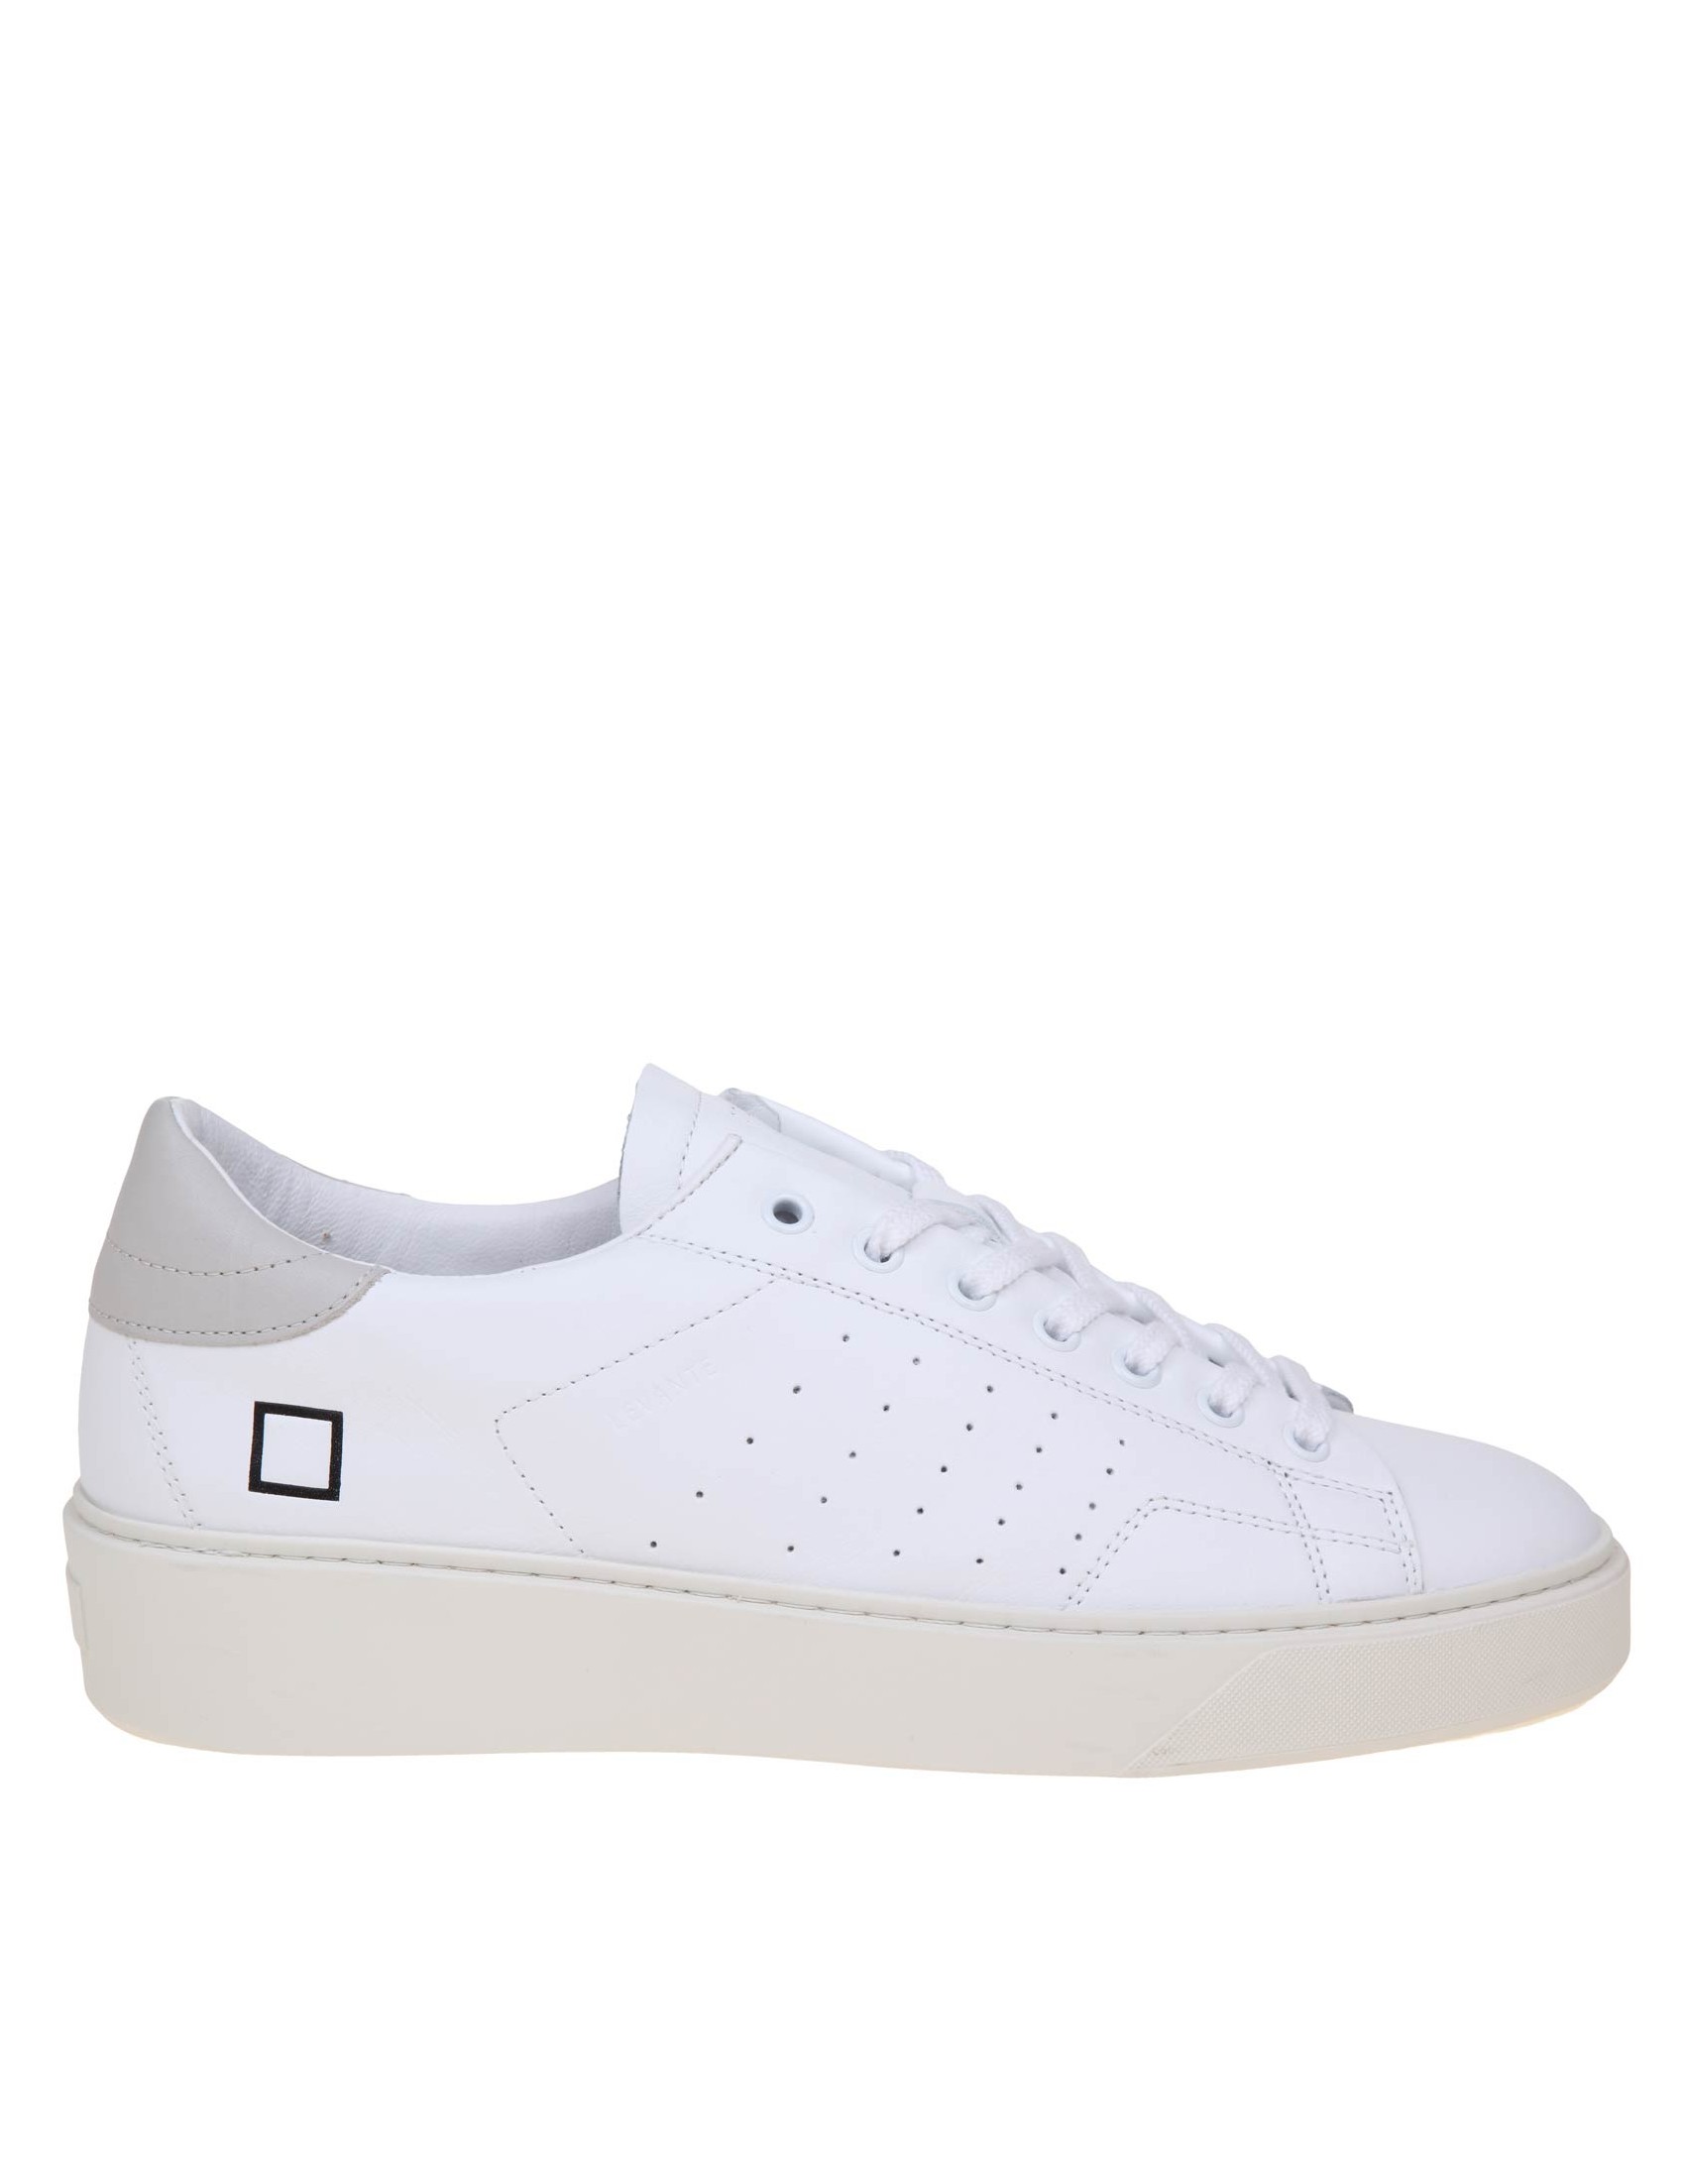 D.A.T.E. LEVANTE IN WHITE AND GRAY LEATHER